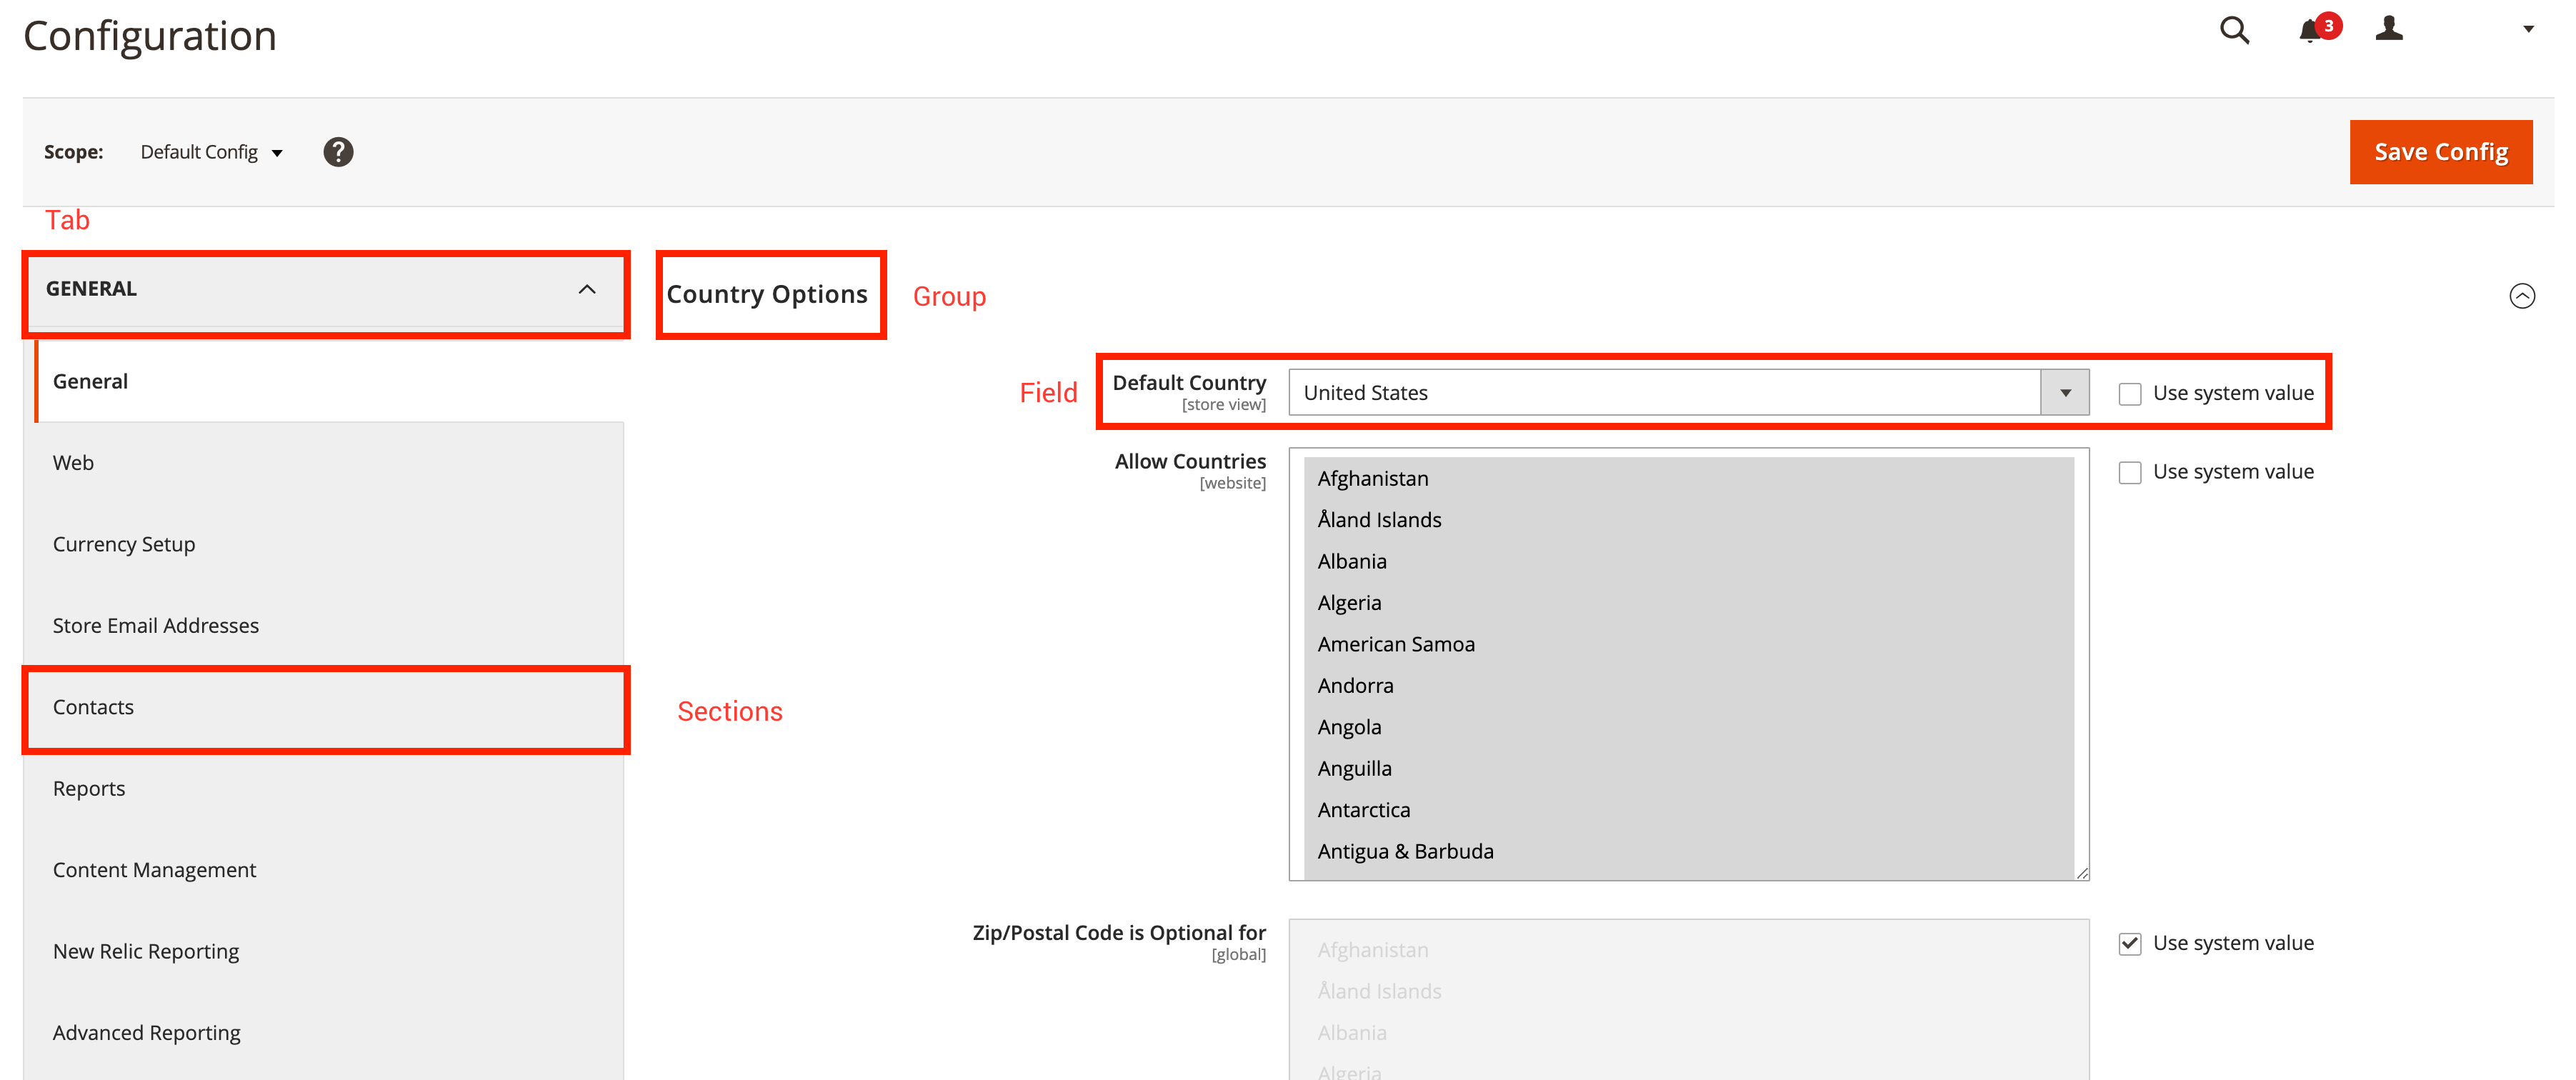 Screenshot displaying a configured section in the Magento Admin.